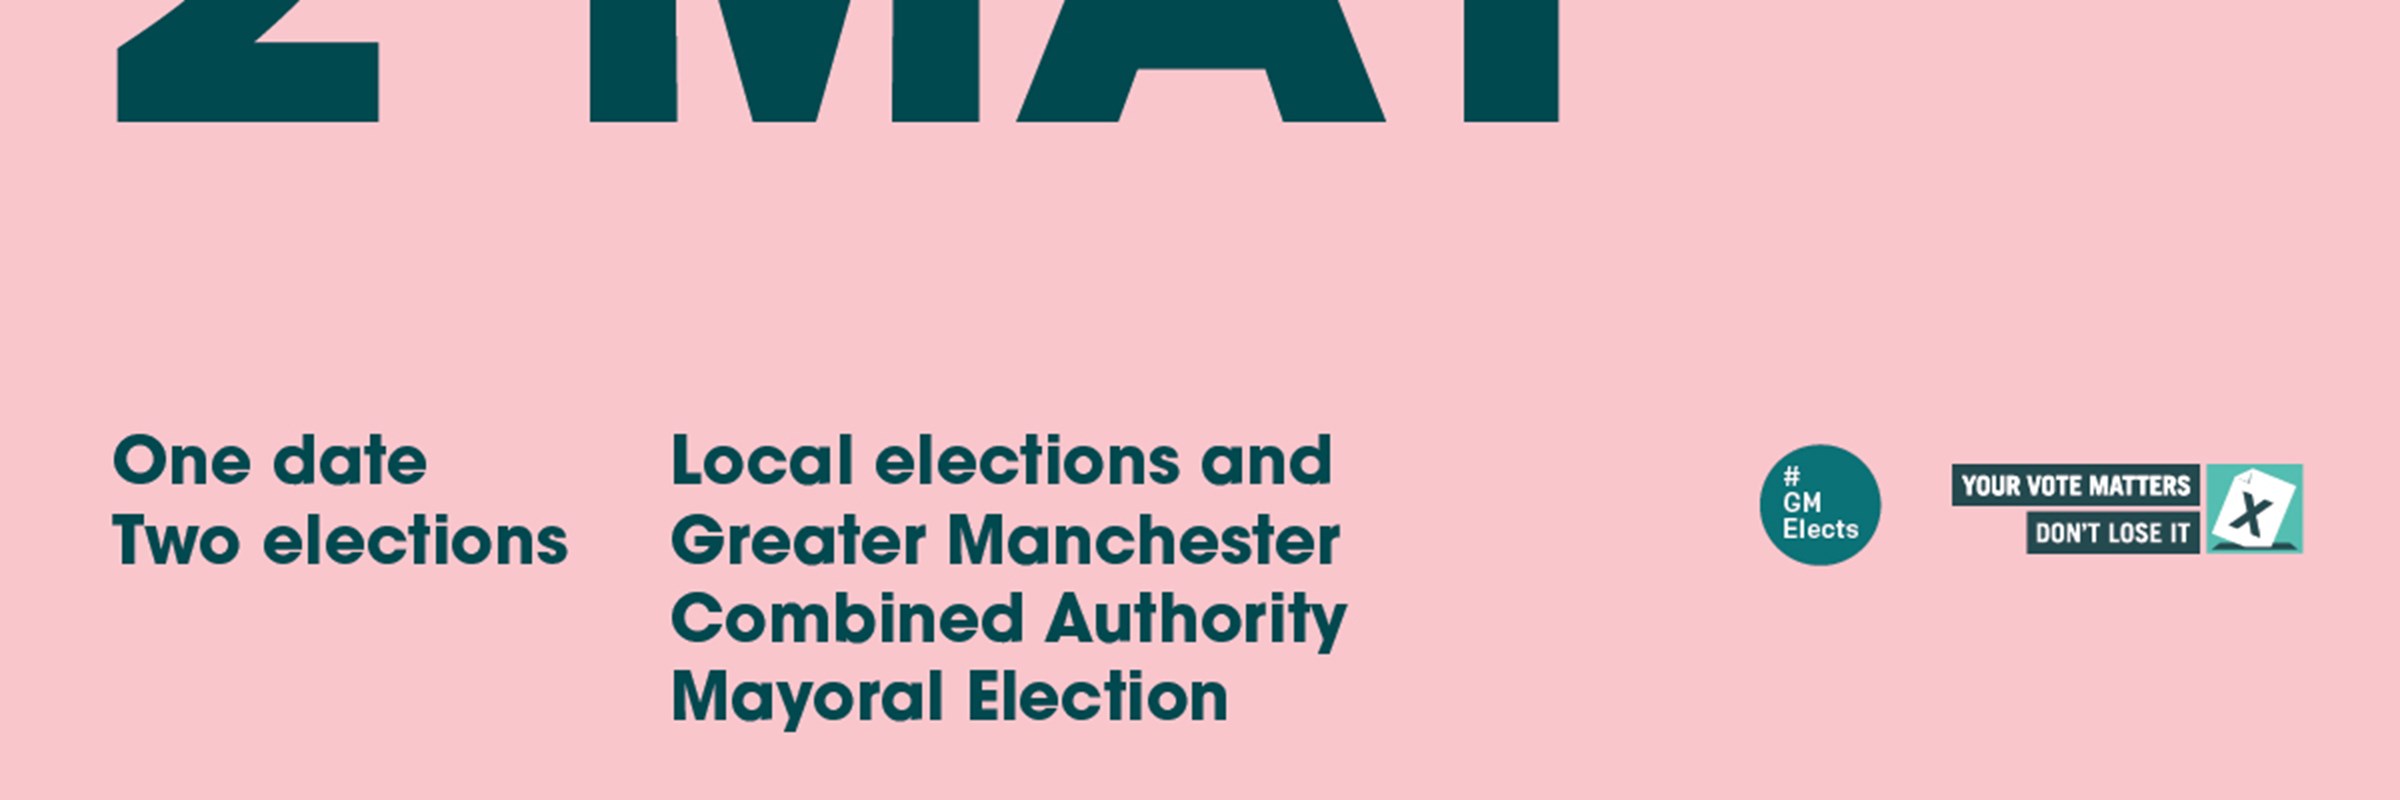 An image of text reading 'One date, Two elections - Local elections and Greater Manchester Combined Authority Mayoral Election'